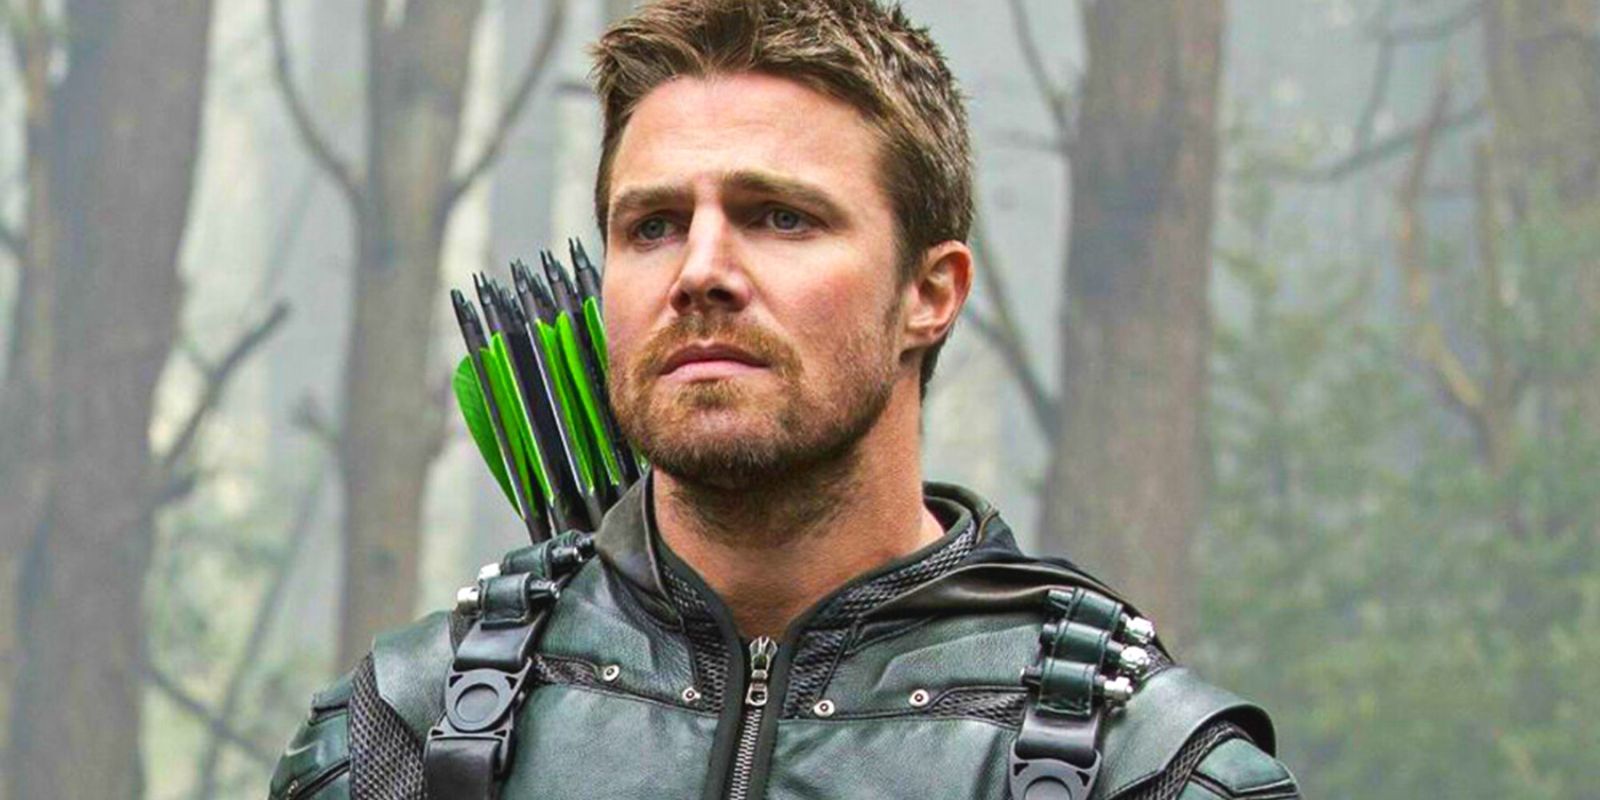 Green Arrow, played by Stephen Amell, stands in the woods